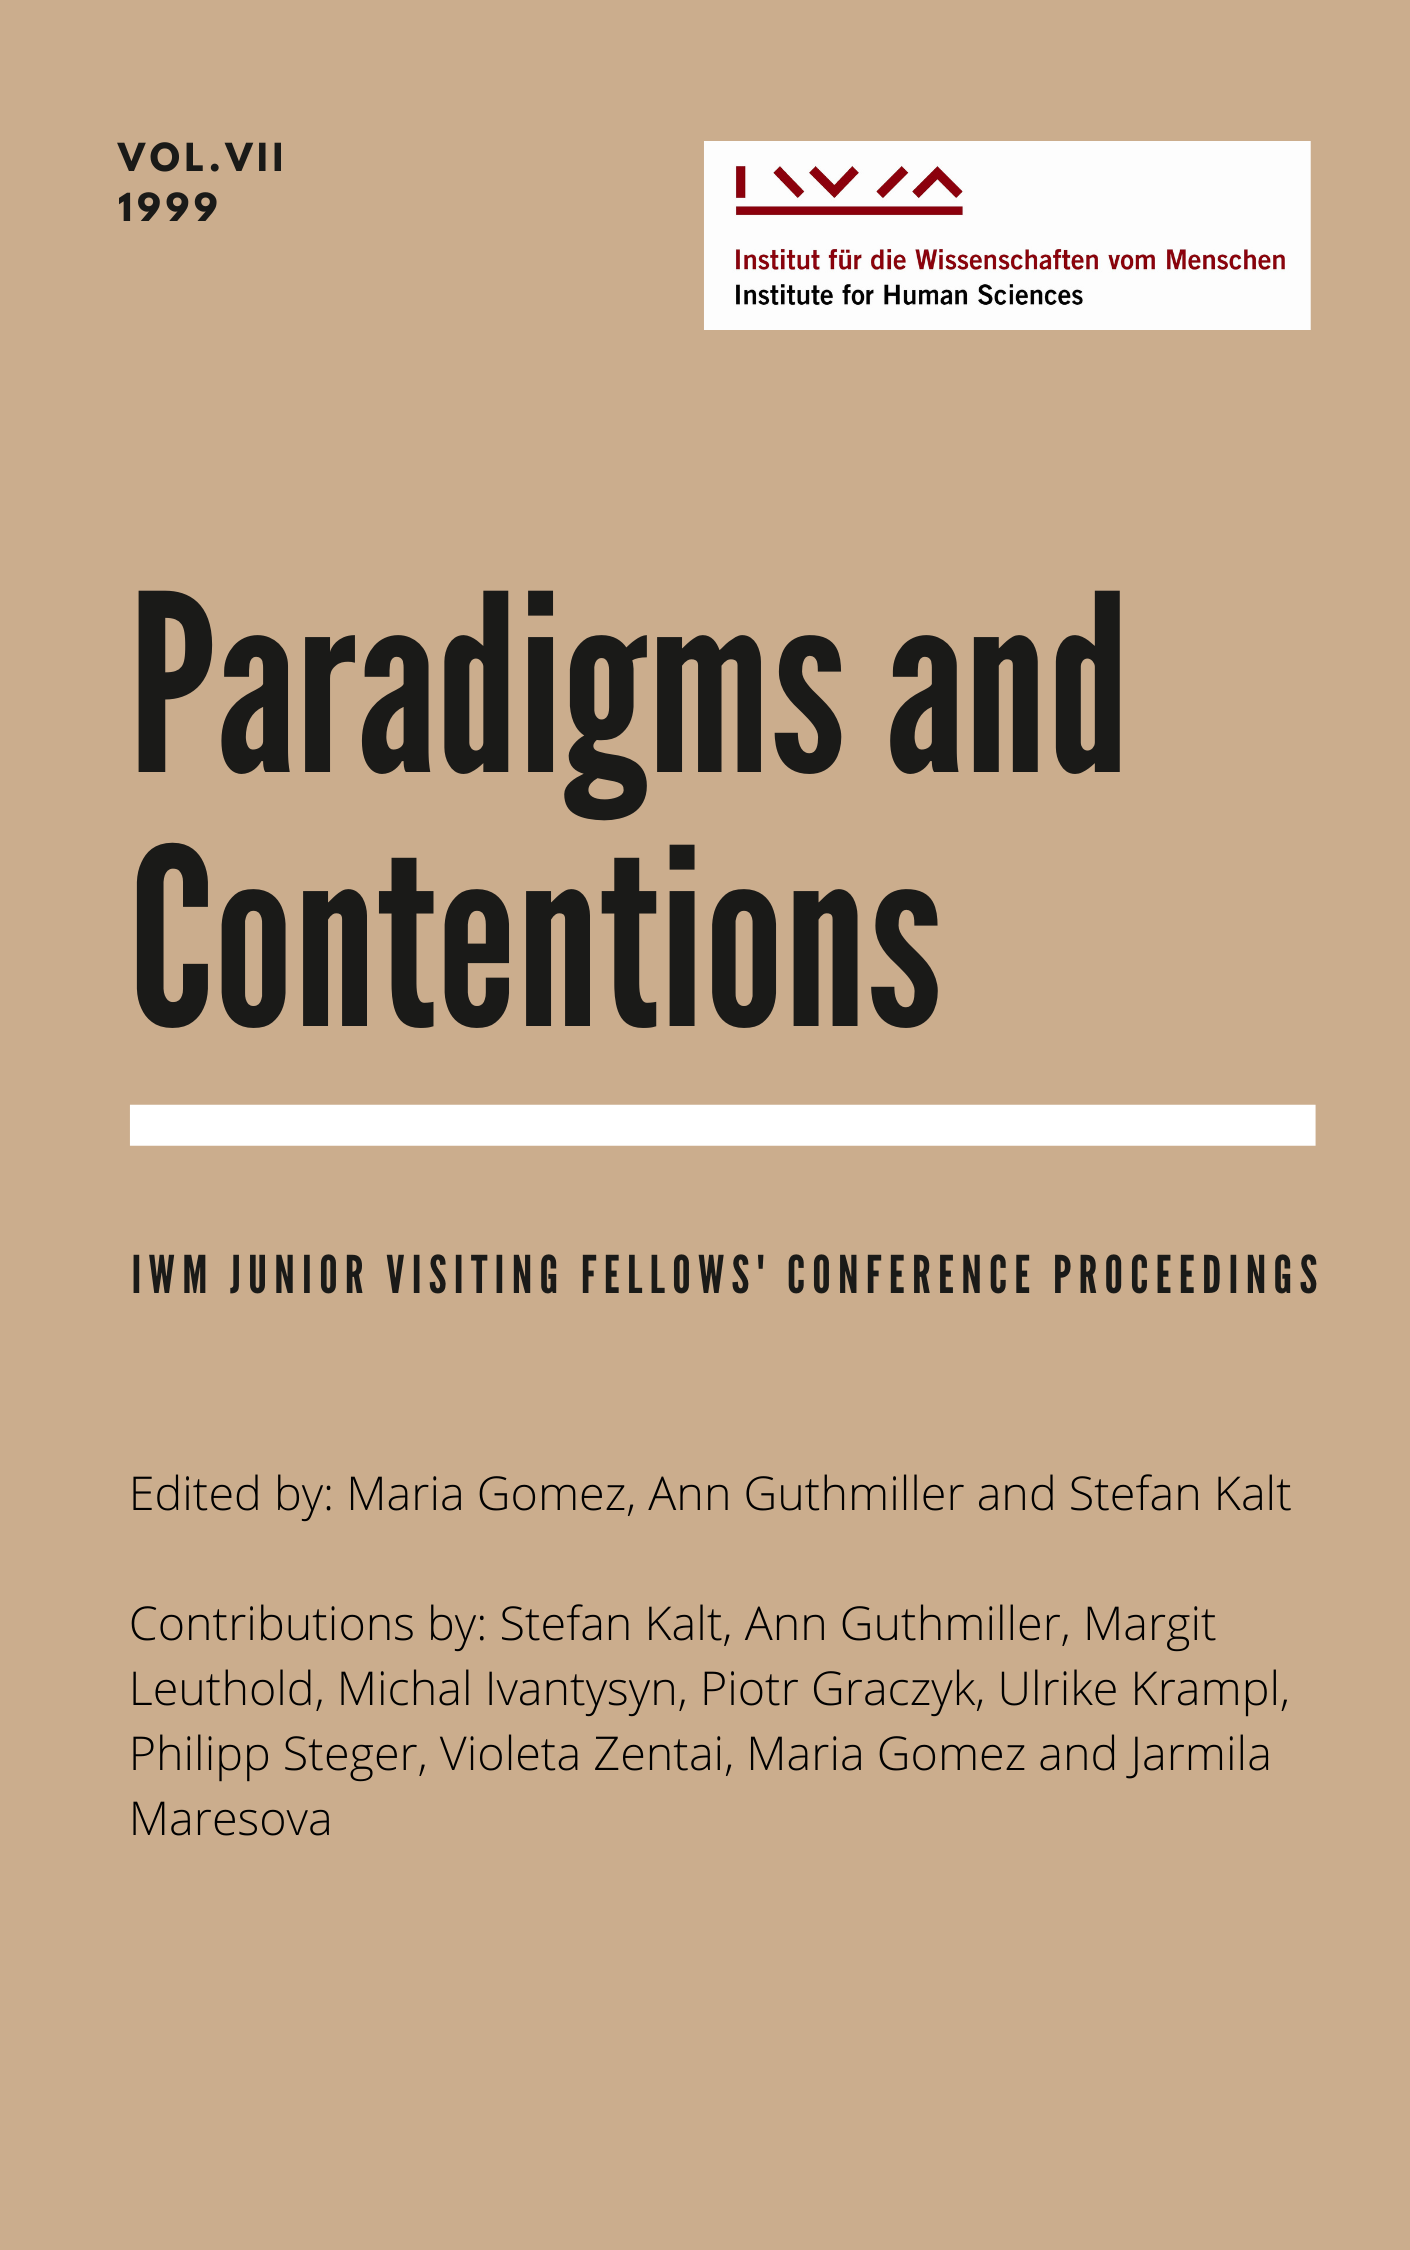 Cover for Vol VII Paradigms and Contentions